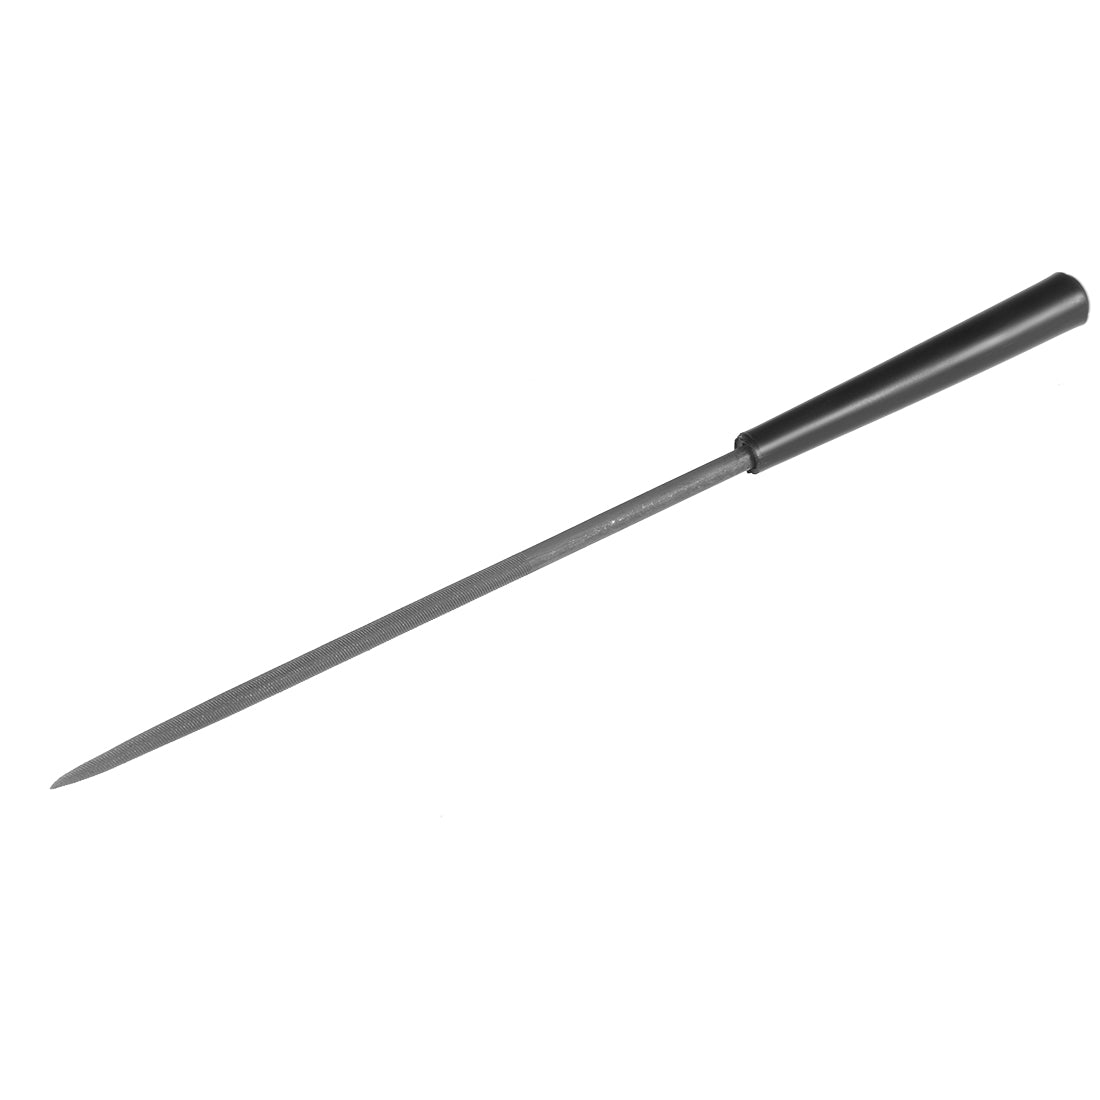 uxcell Uxcell Second Cut Steel Round Needle File with Plastic Handle, 3mm x 140mm